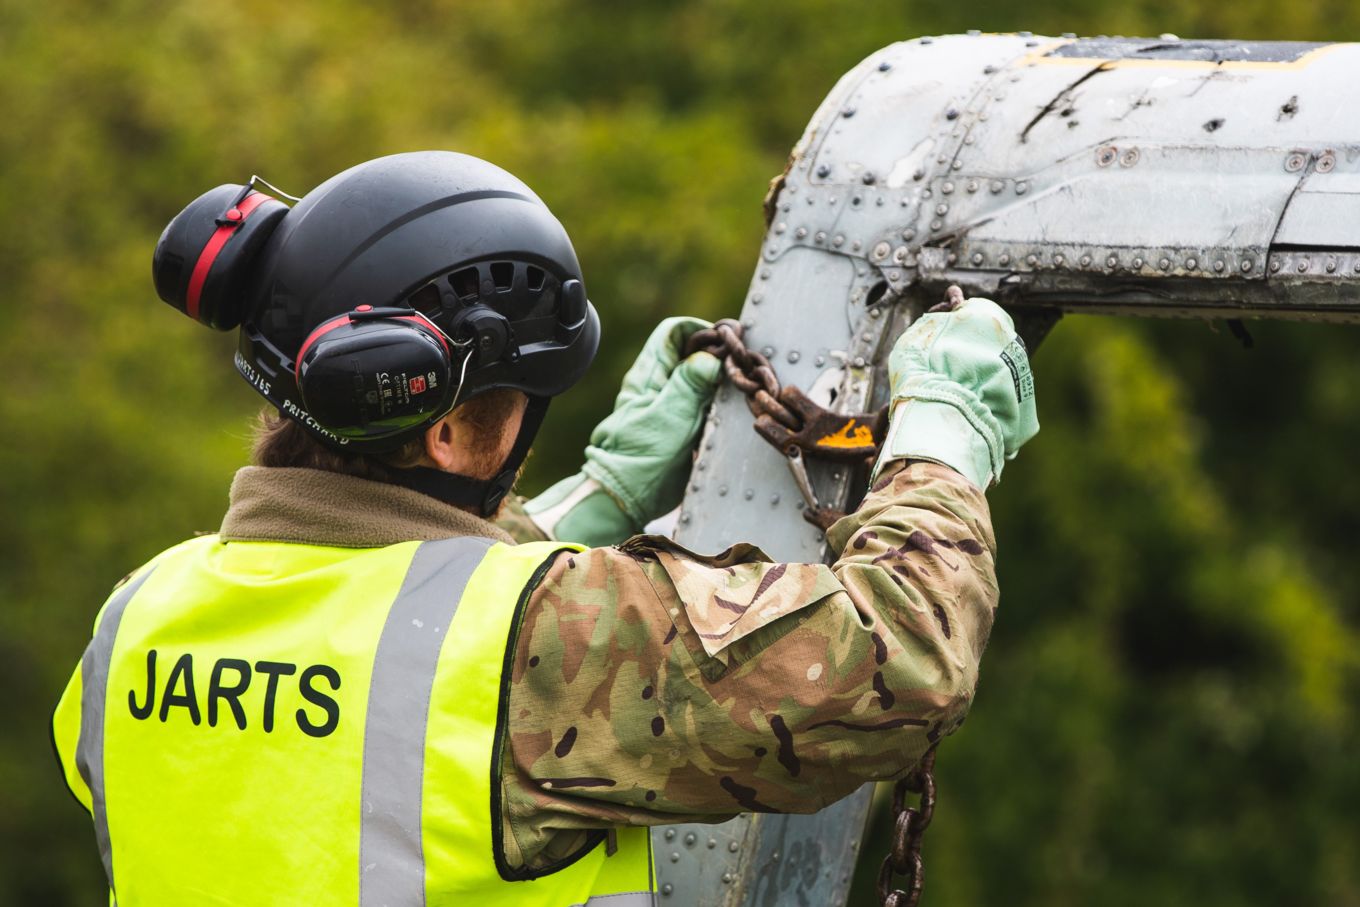 A member of the JARTS teams secures the helicopter fuselage before lifting